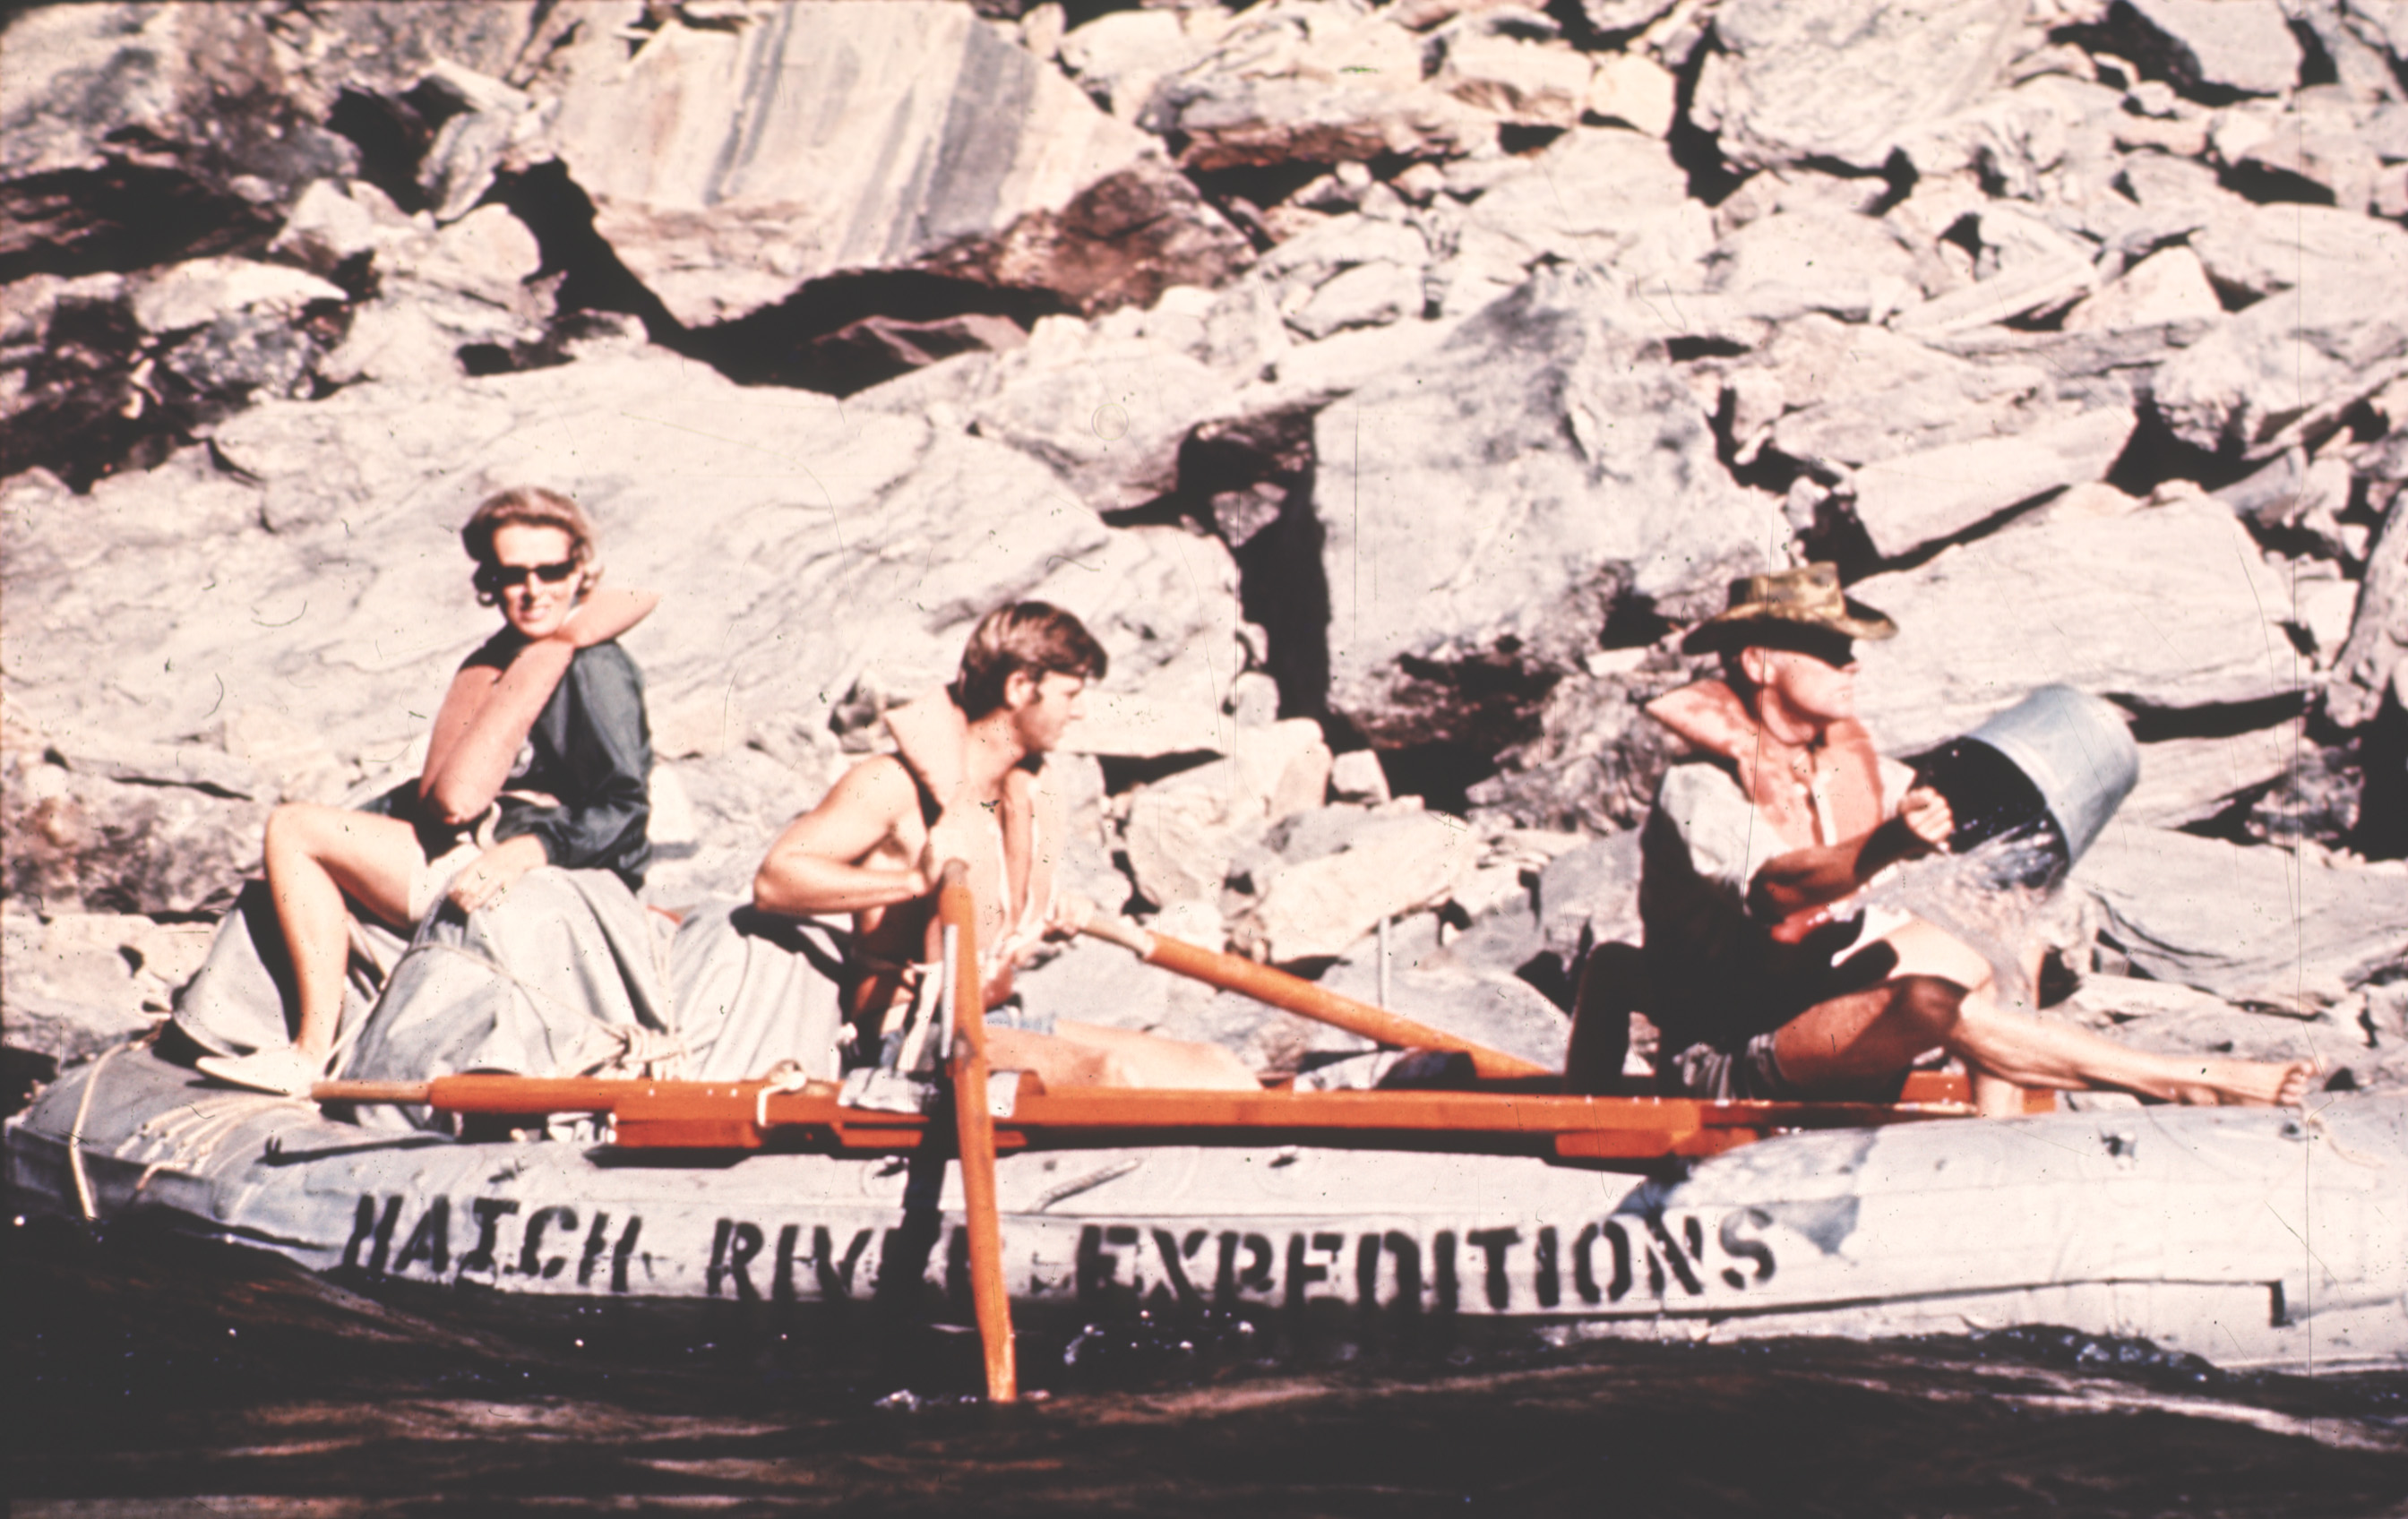 one guide rowing a Hatch River Expeditions oar powered raft with two guests during the 1970s